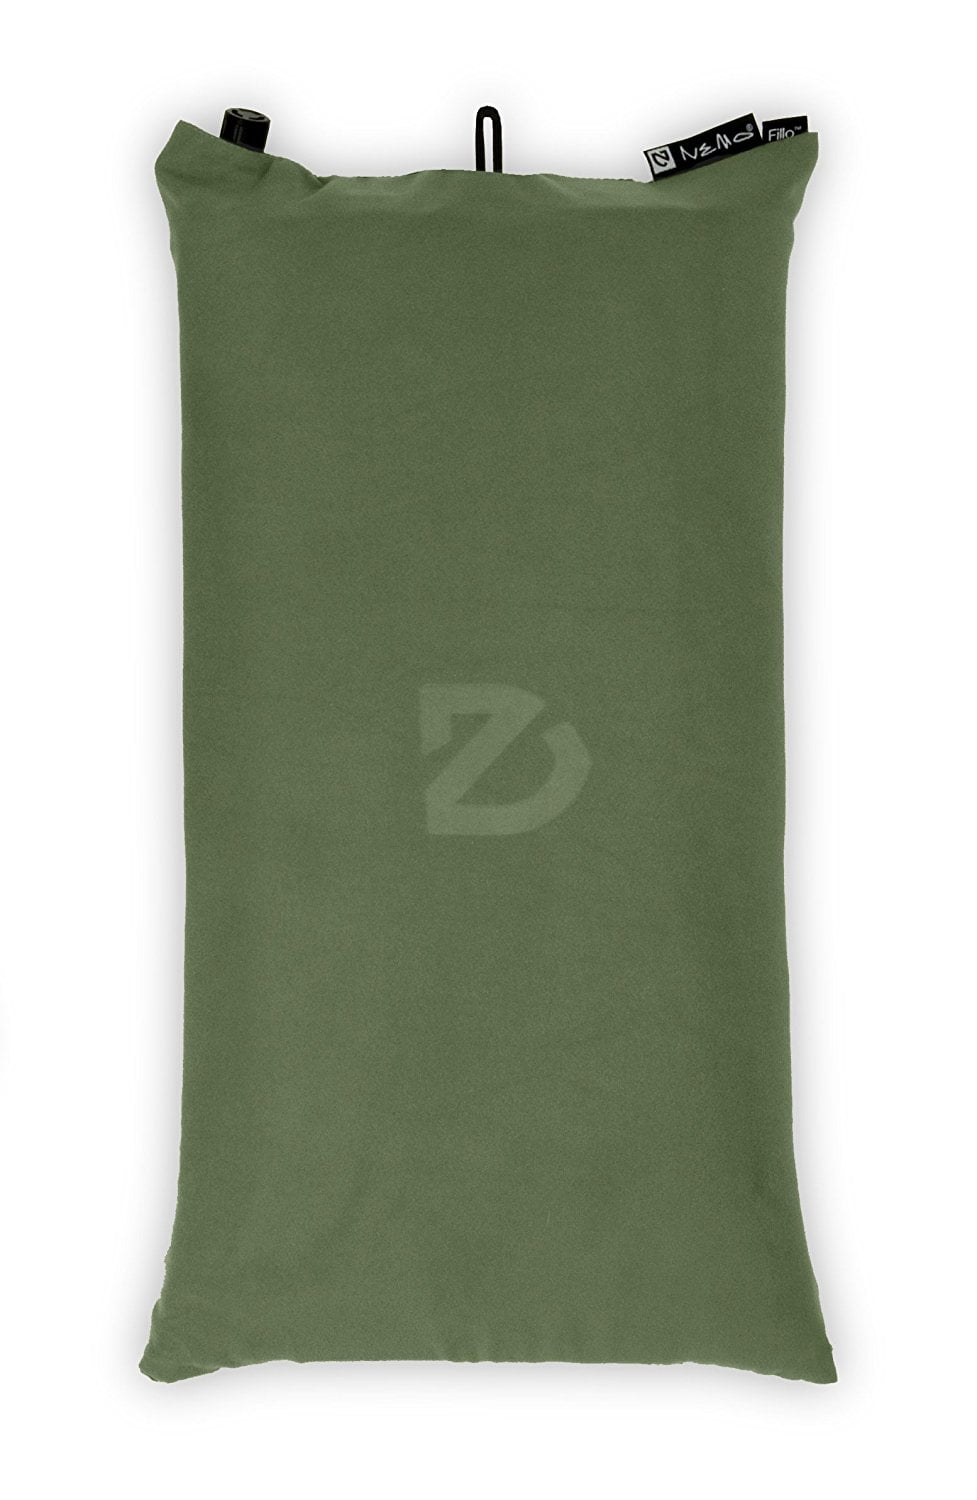 Nemo FILLO Luxury Backpacking & Camping Pillow Moss Green